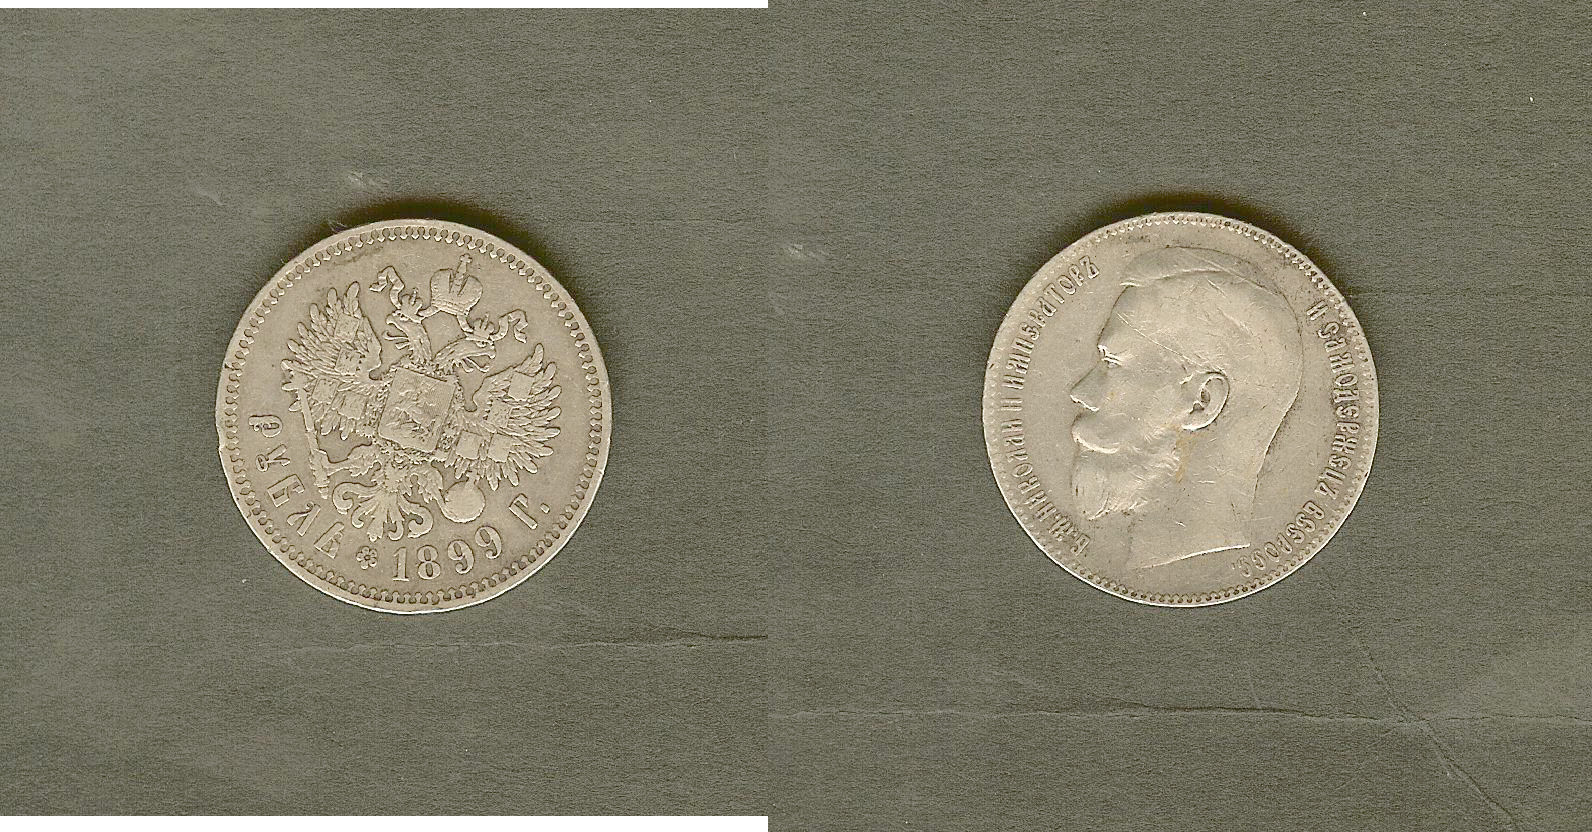 Russia rouble 1899 gVF/aEF